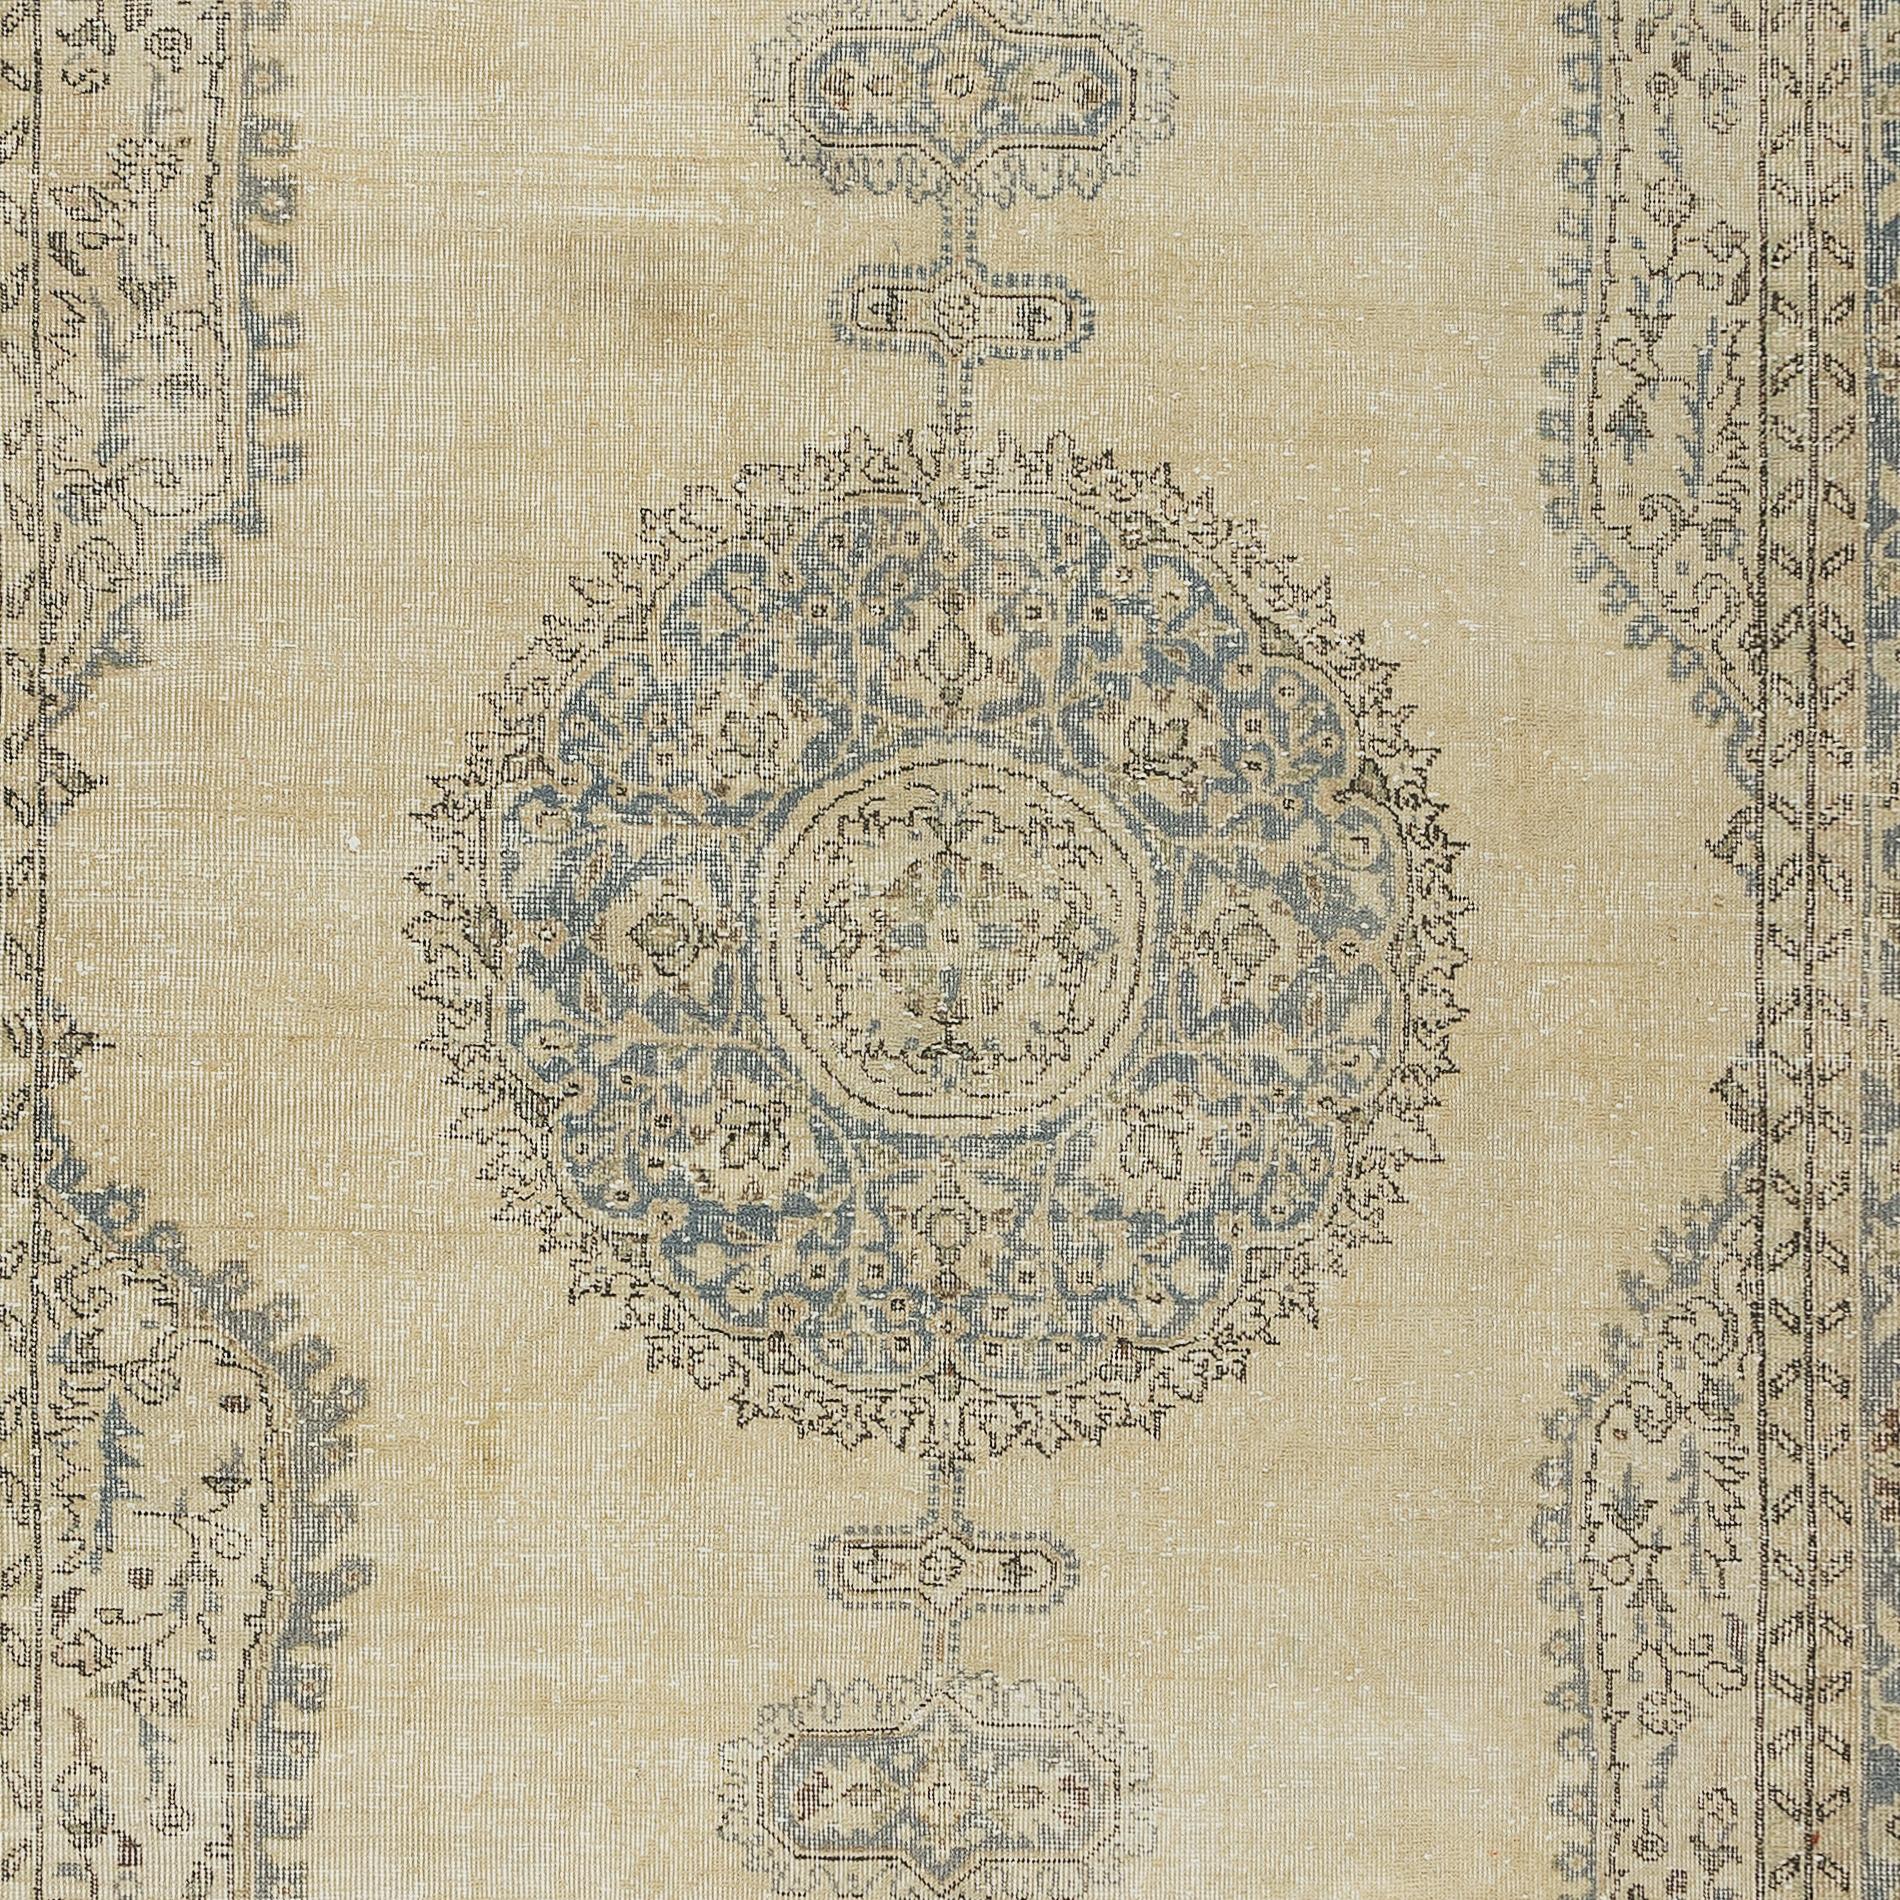 Hand-Knotted 7.3x10.8 Ft Vintage Antique Washed Handmade Turkish Oushak Wool Area Rug For Sale